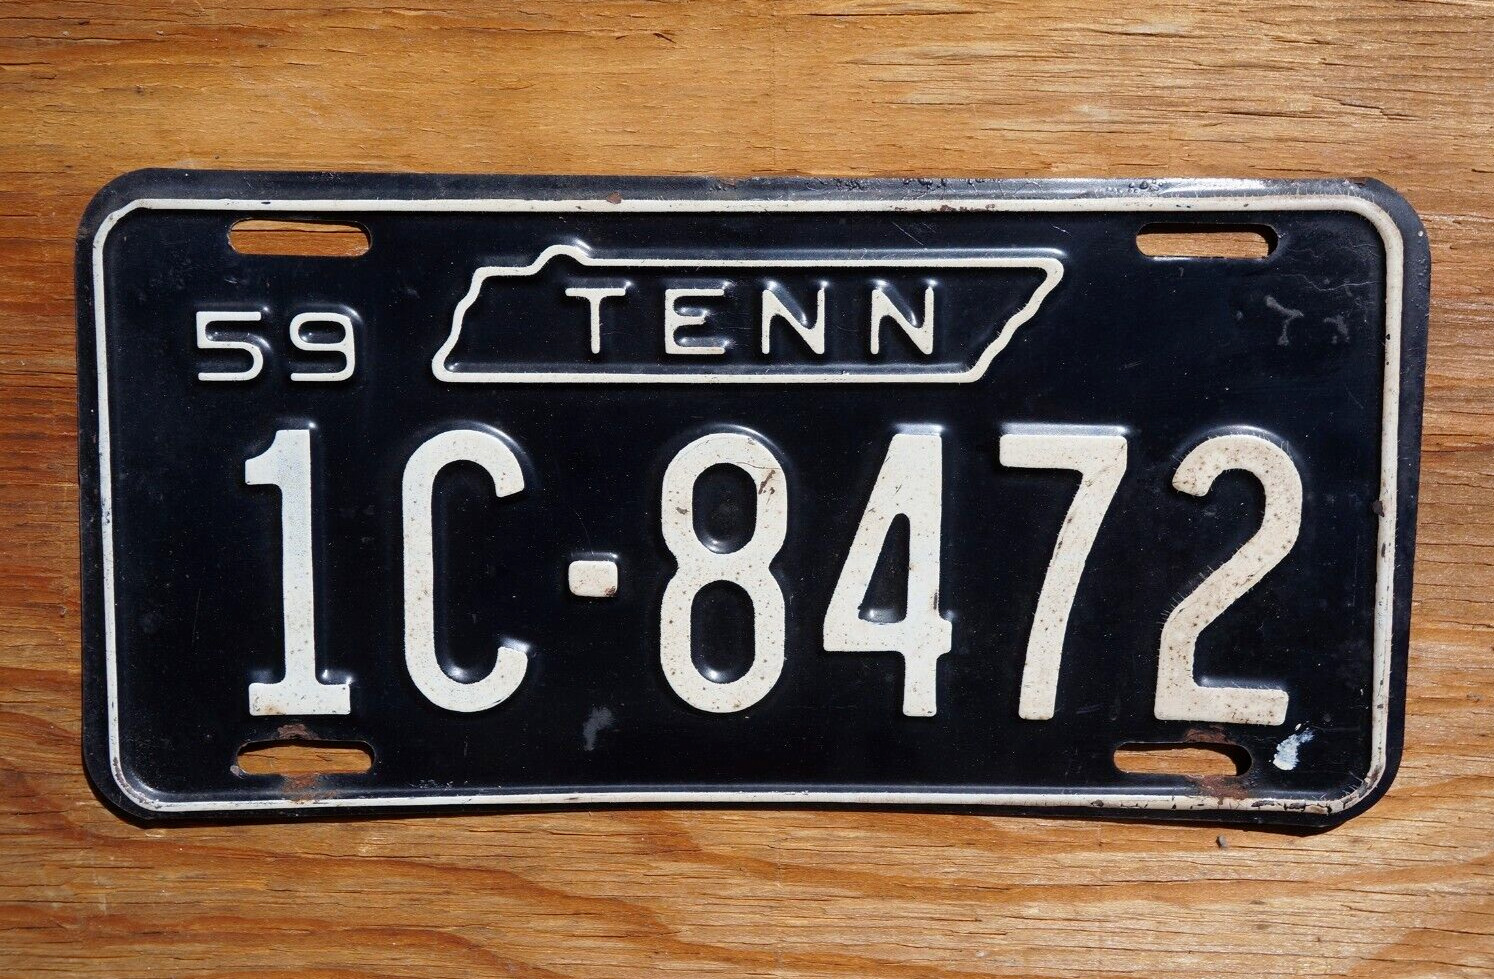 1959 TENNESSEE License Plate